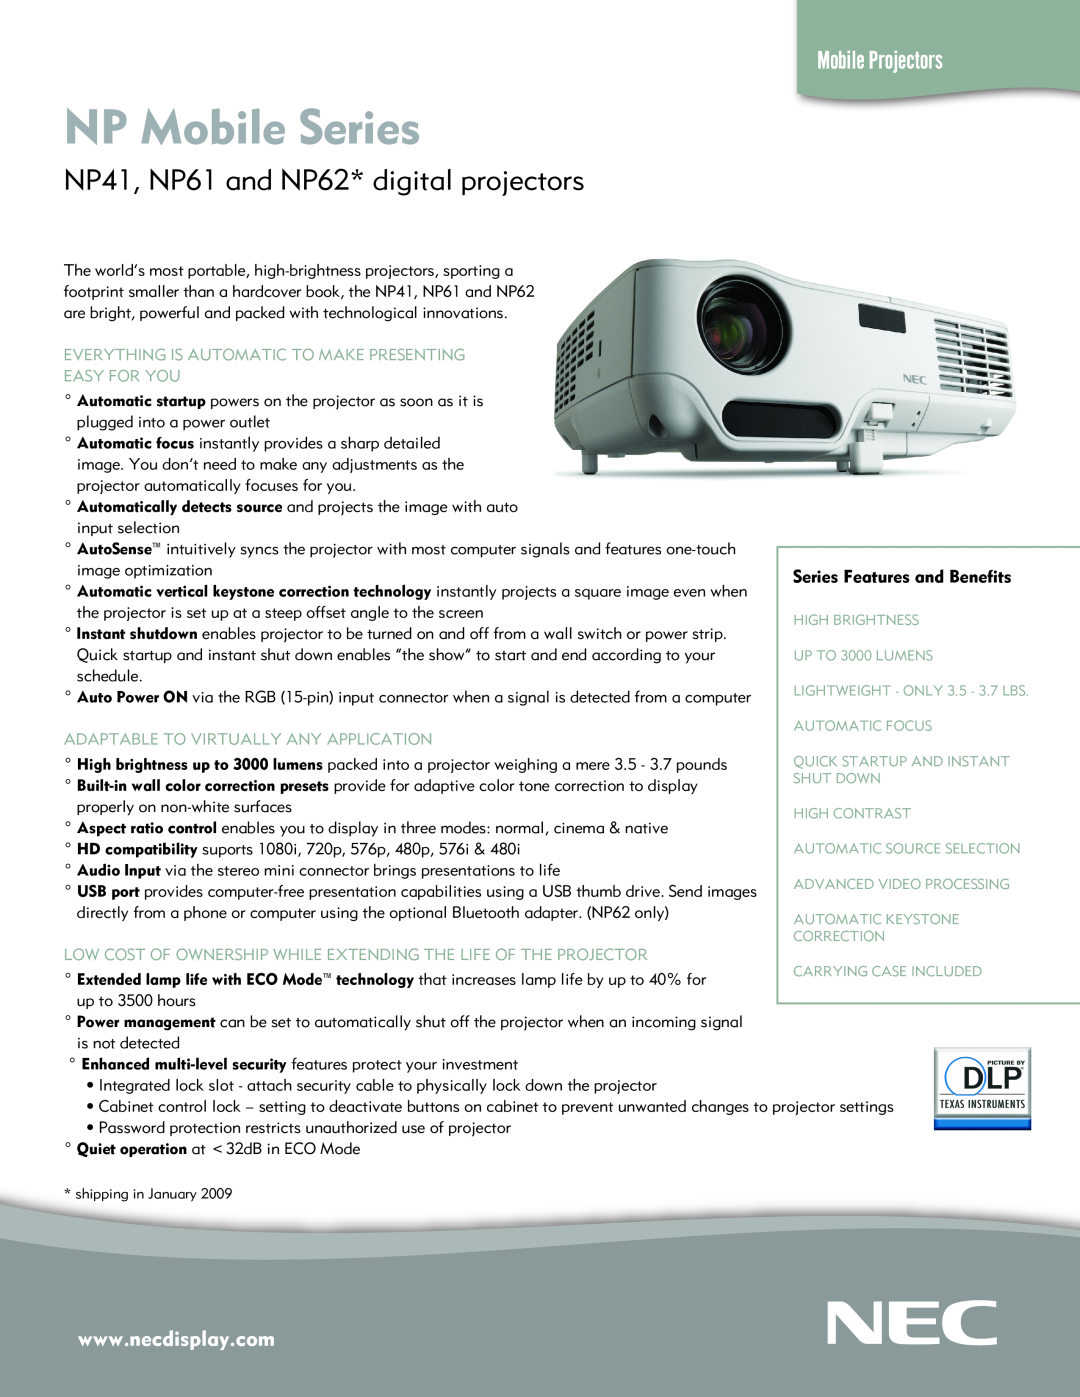 NEC quick start NP Mobile Series, NP41, NP61 and NP62* digital projectors, Series Features and Benefits 